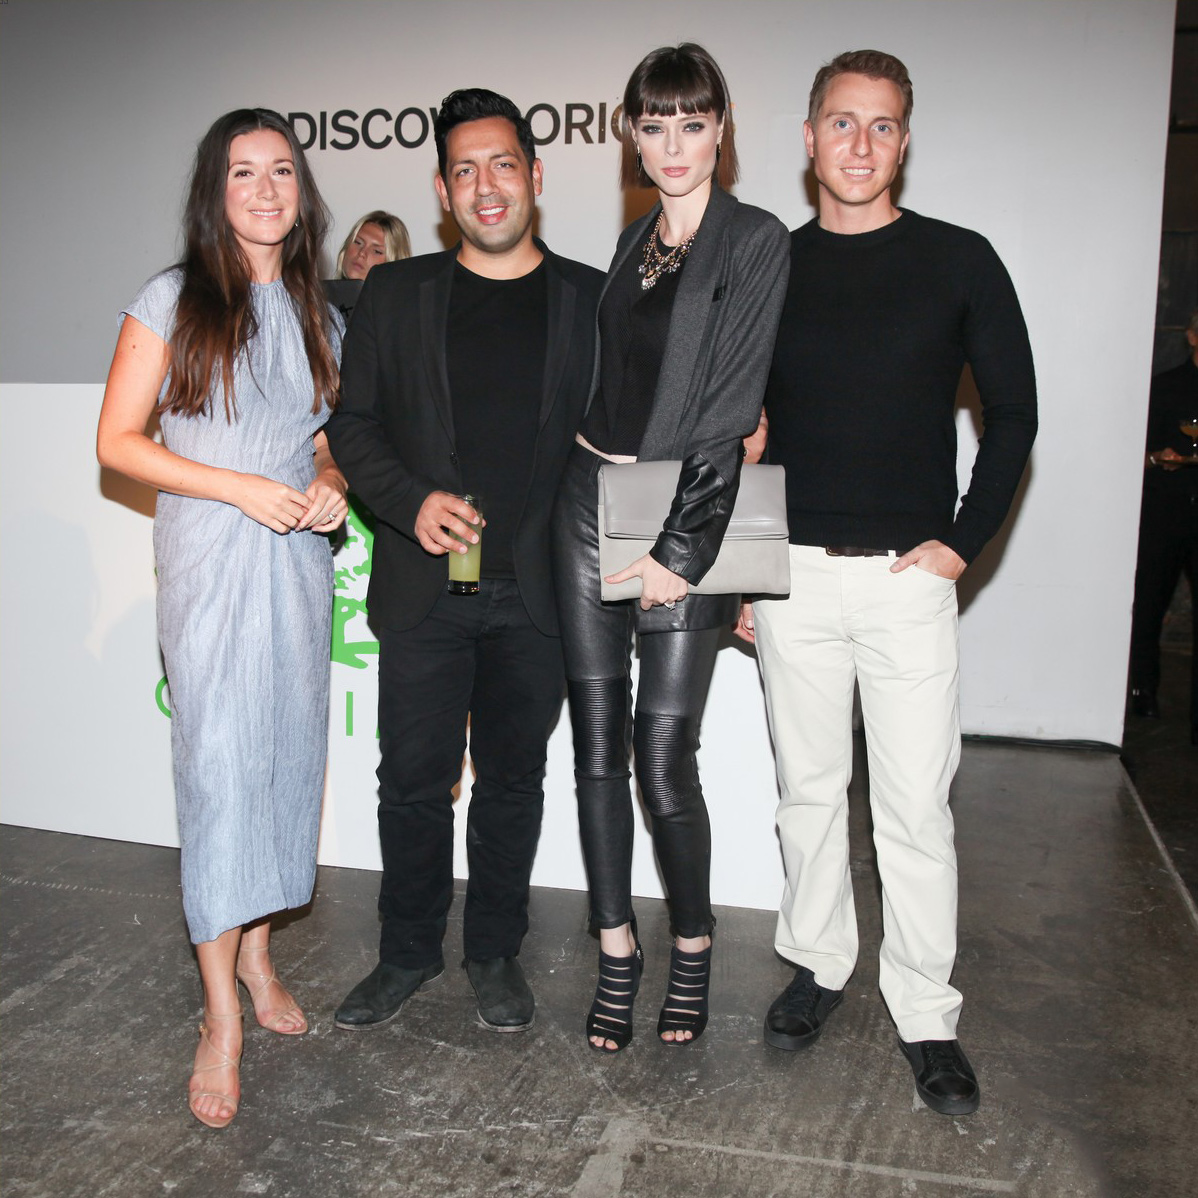 Coco Rocha attends On the Road with Origins global premiere